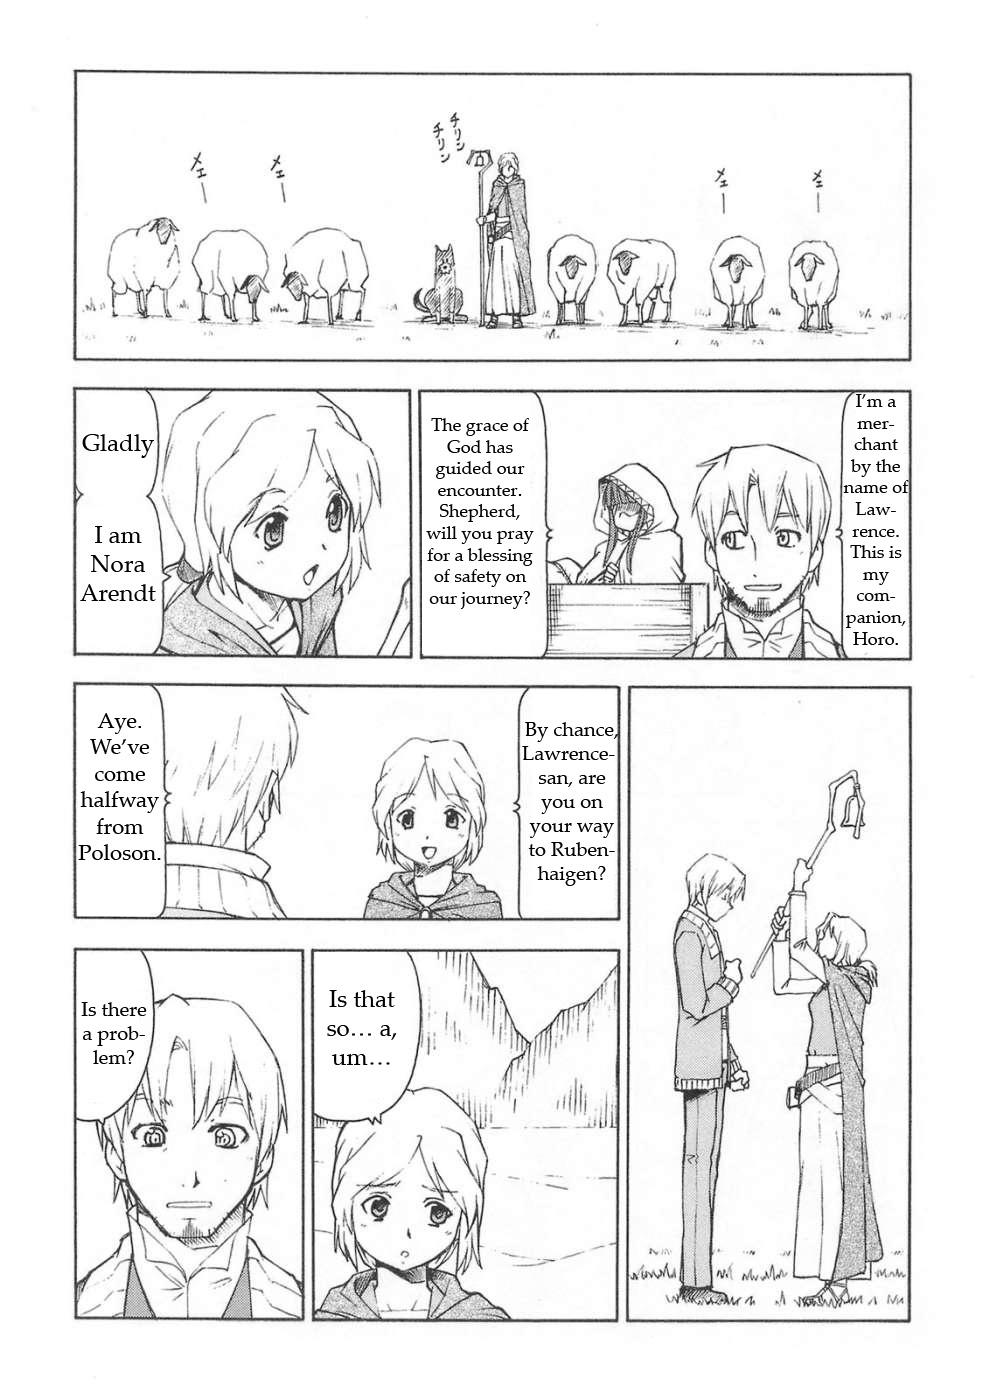 Thot Ookami to Butter Inu - Spice and wolf Spank - Page 12